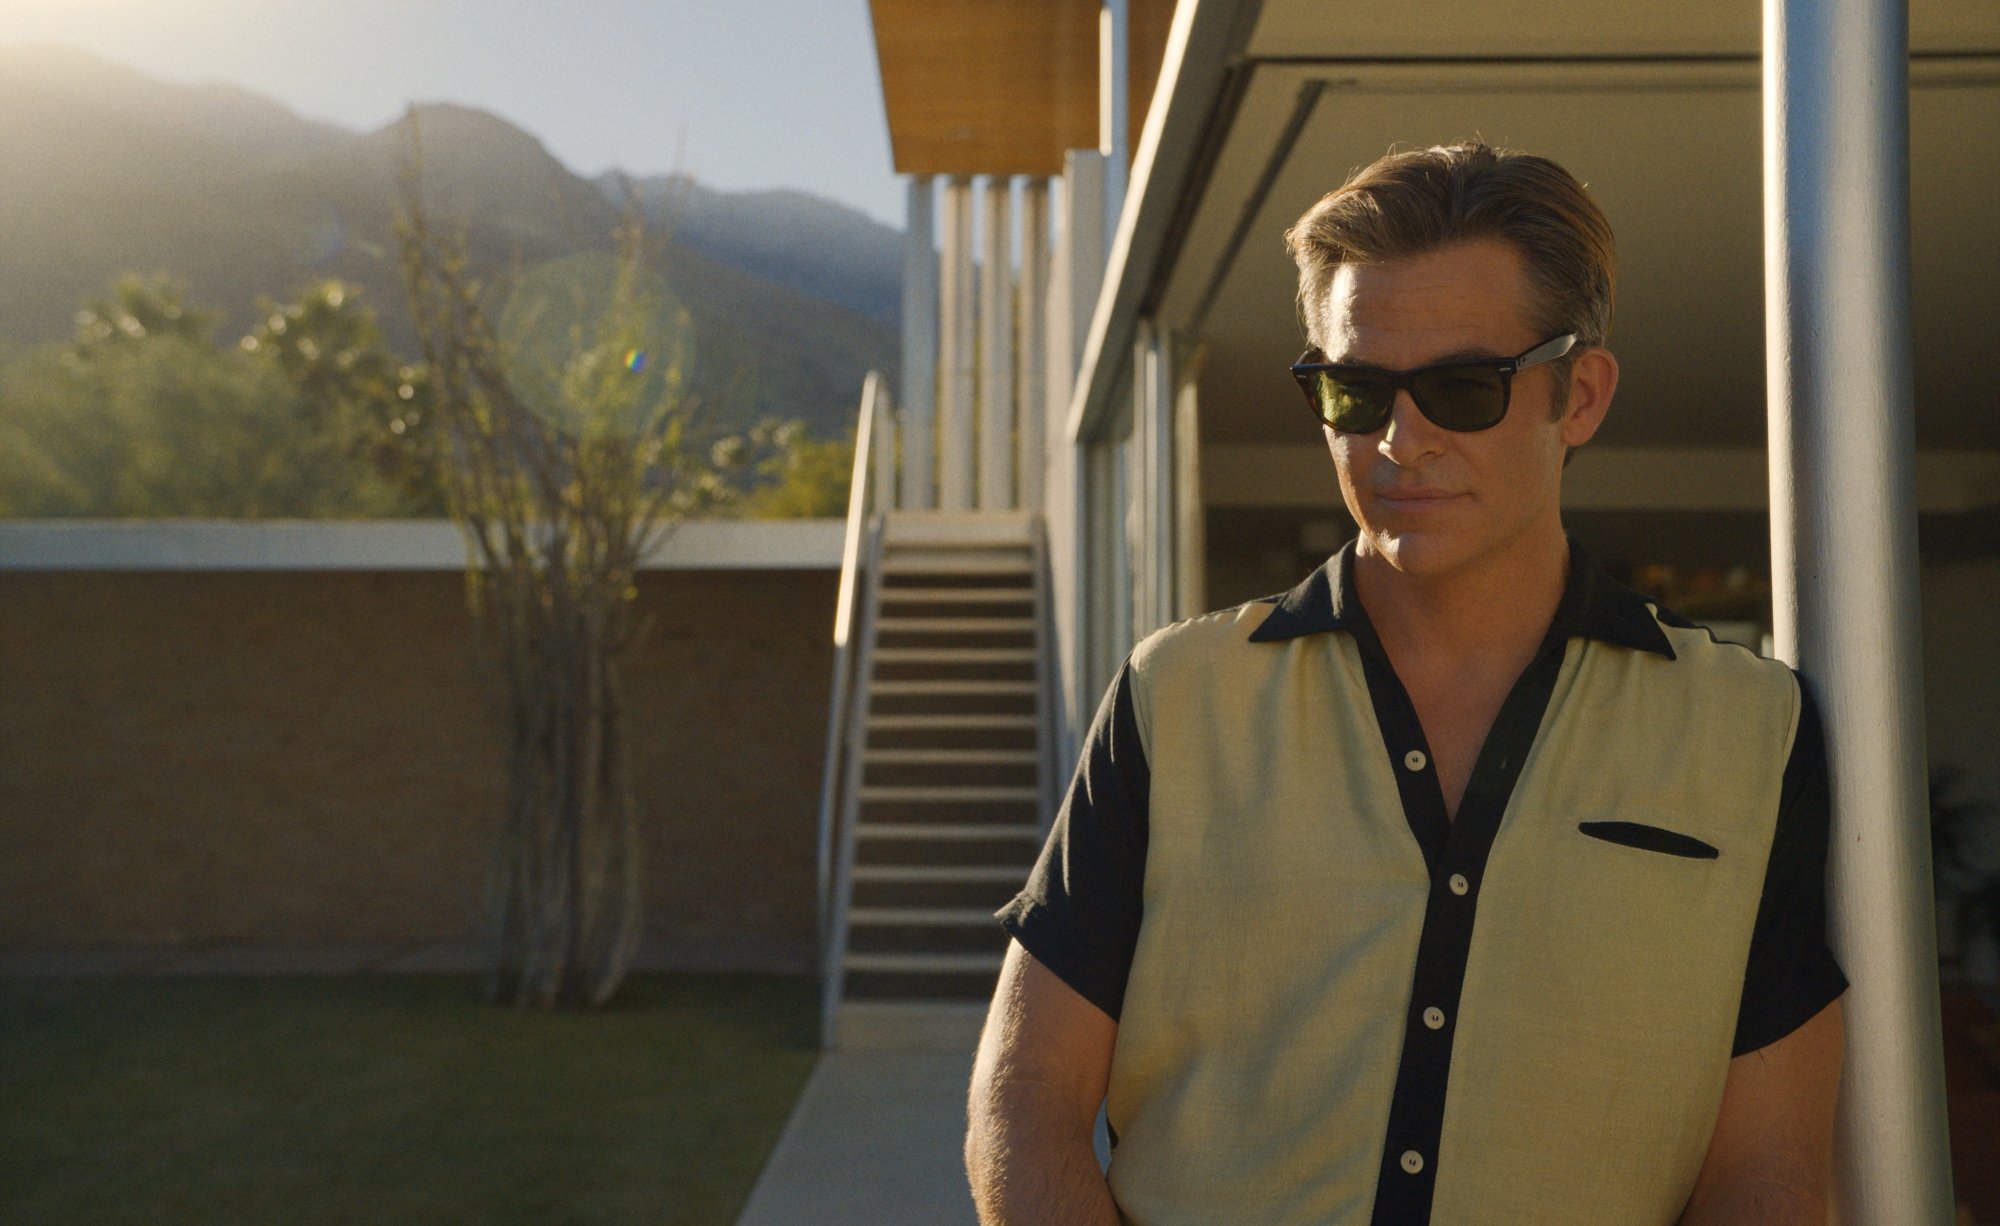 'Don't Worry Darling' Chris Pine as Frank. He's wearing sunglasses and a collared shirt and leaning against his modern home with the external staircase in the background.